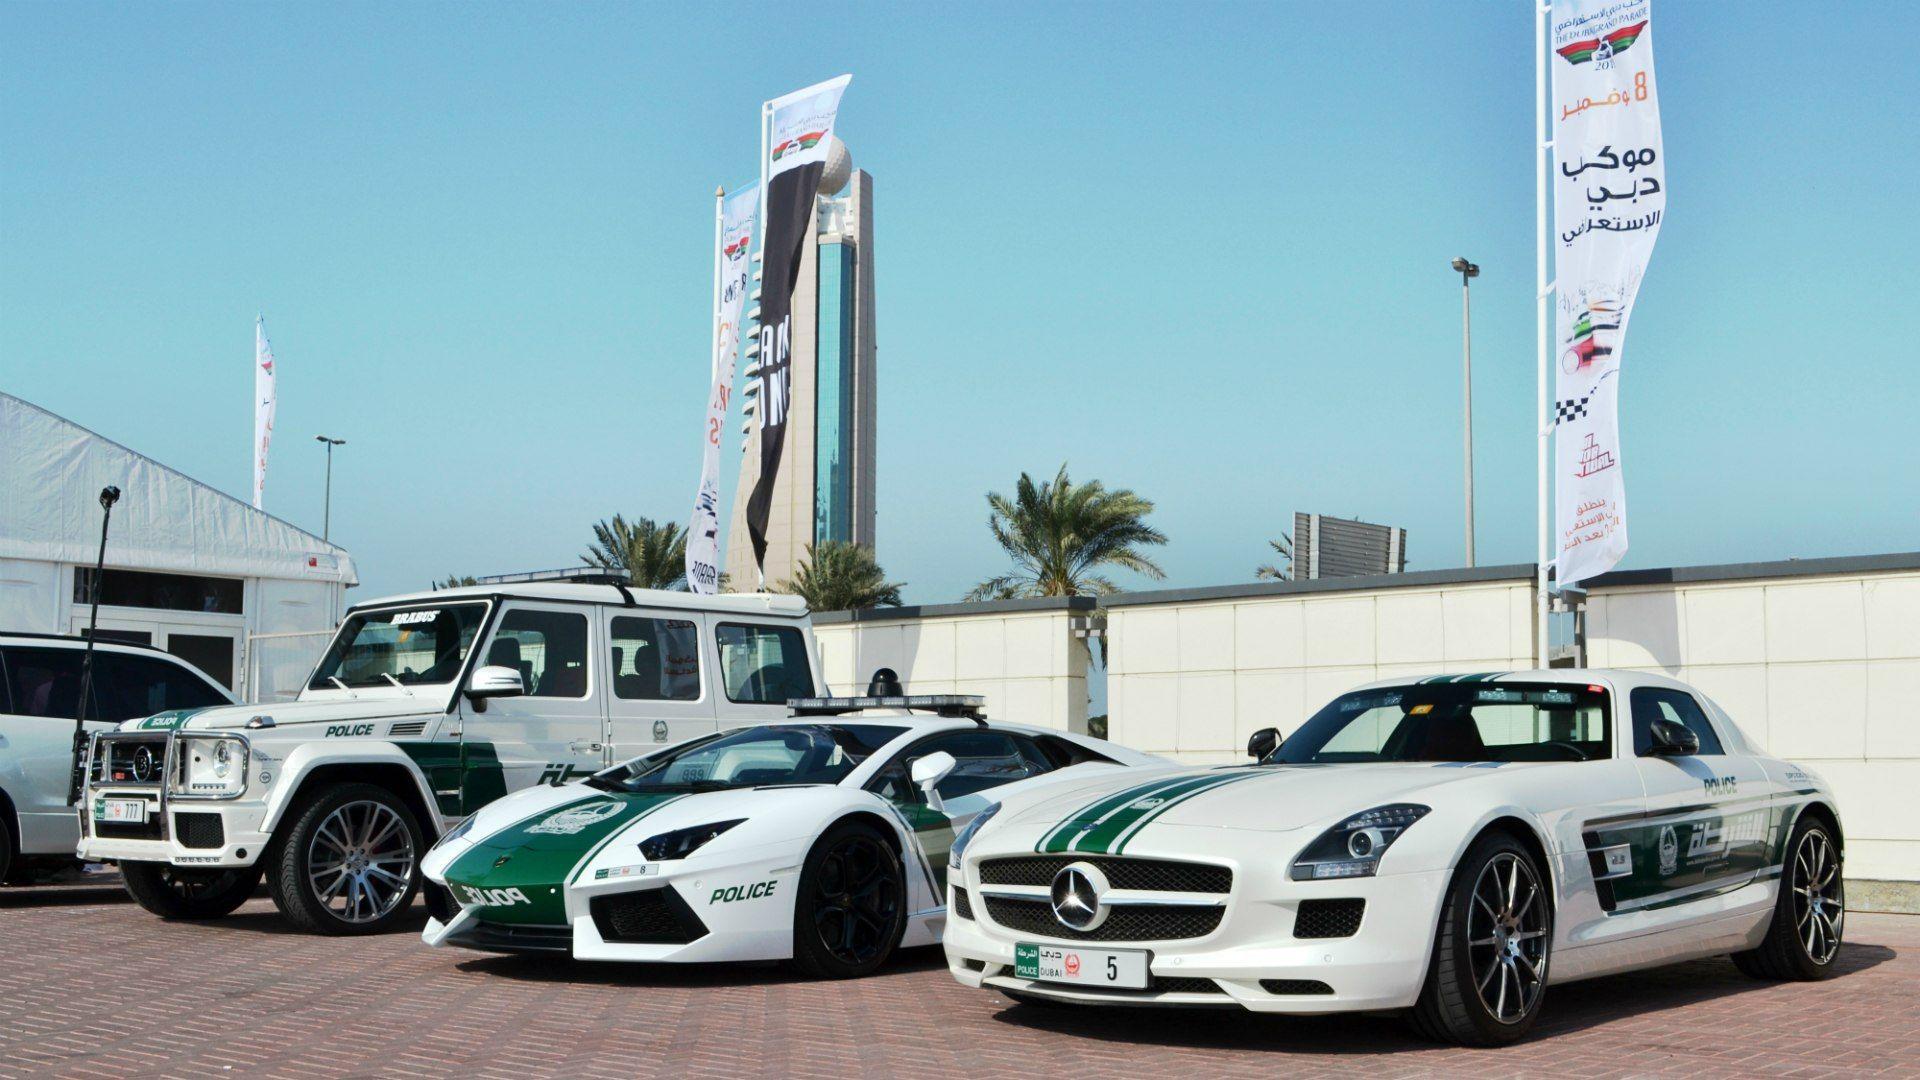 Dubai Police Cars wallpaper and image, picture, photo